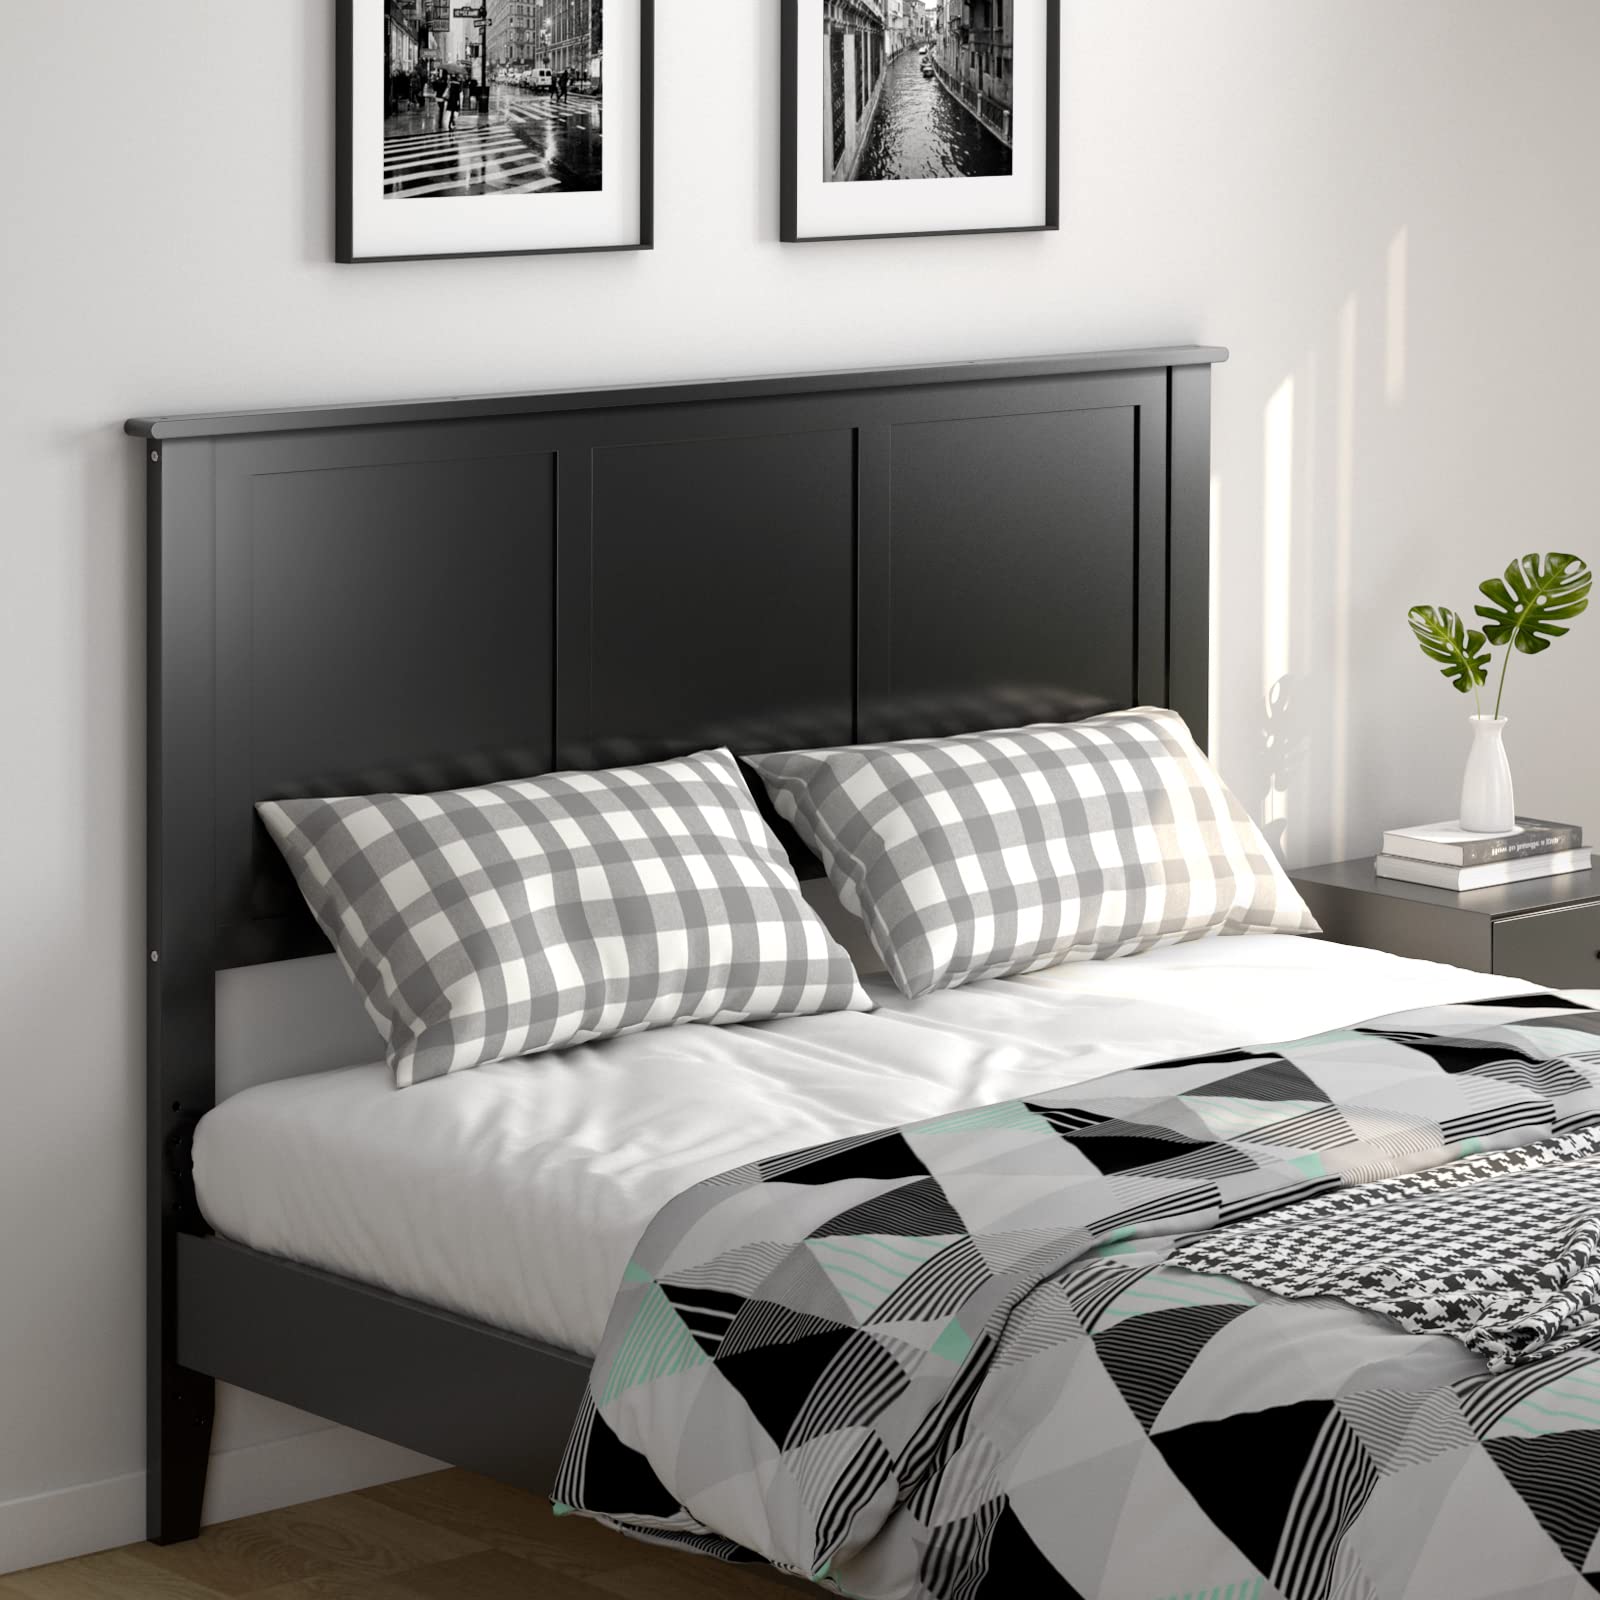 Giantex Wood Headboard, Flat Panel Headboard with Pre-drilled Holes for Height Adjustment